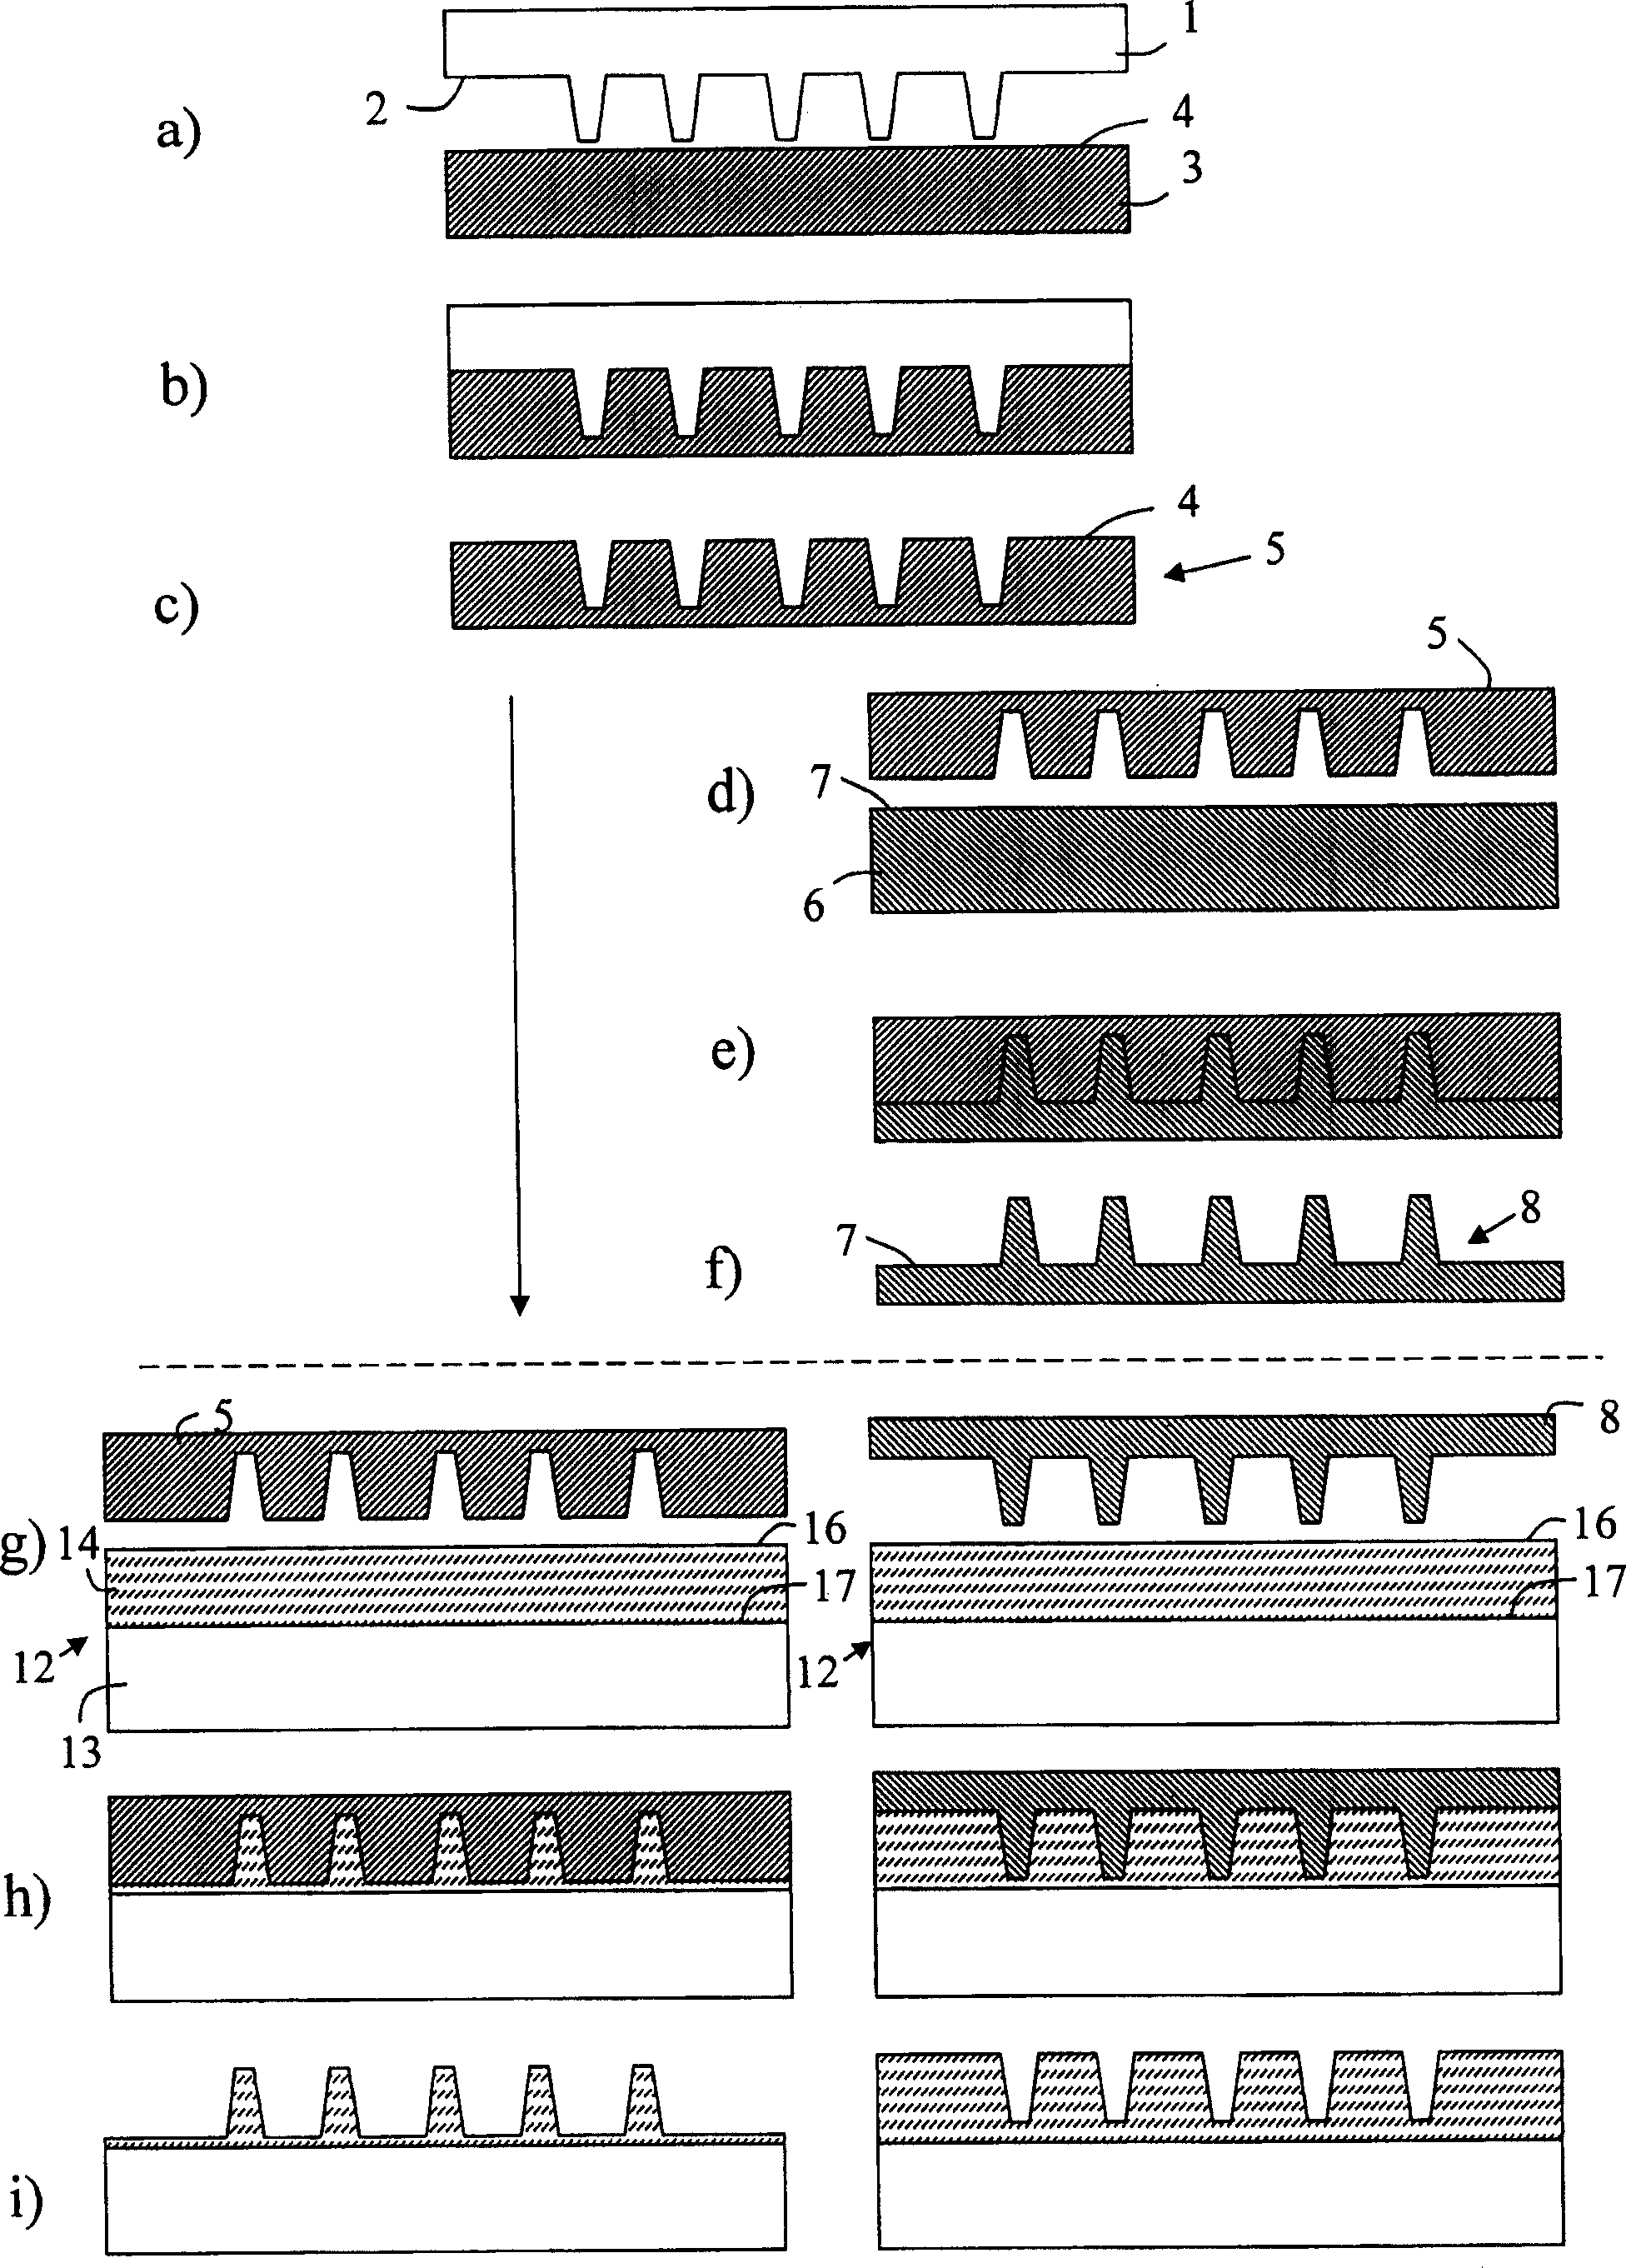 Pattern replication with intermediate stamp